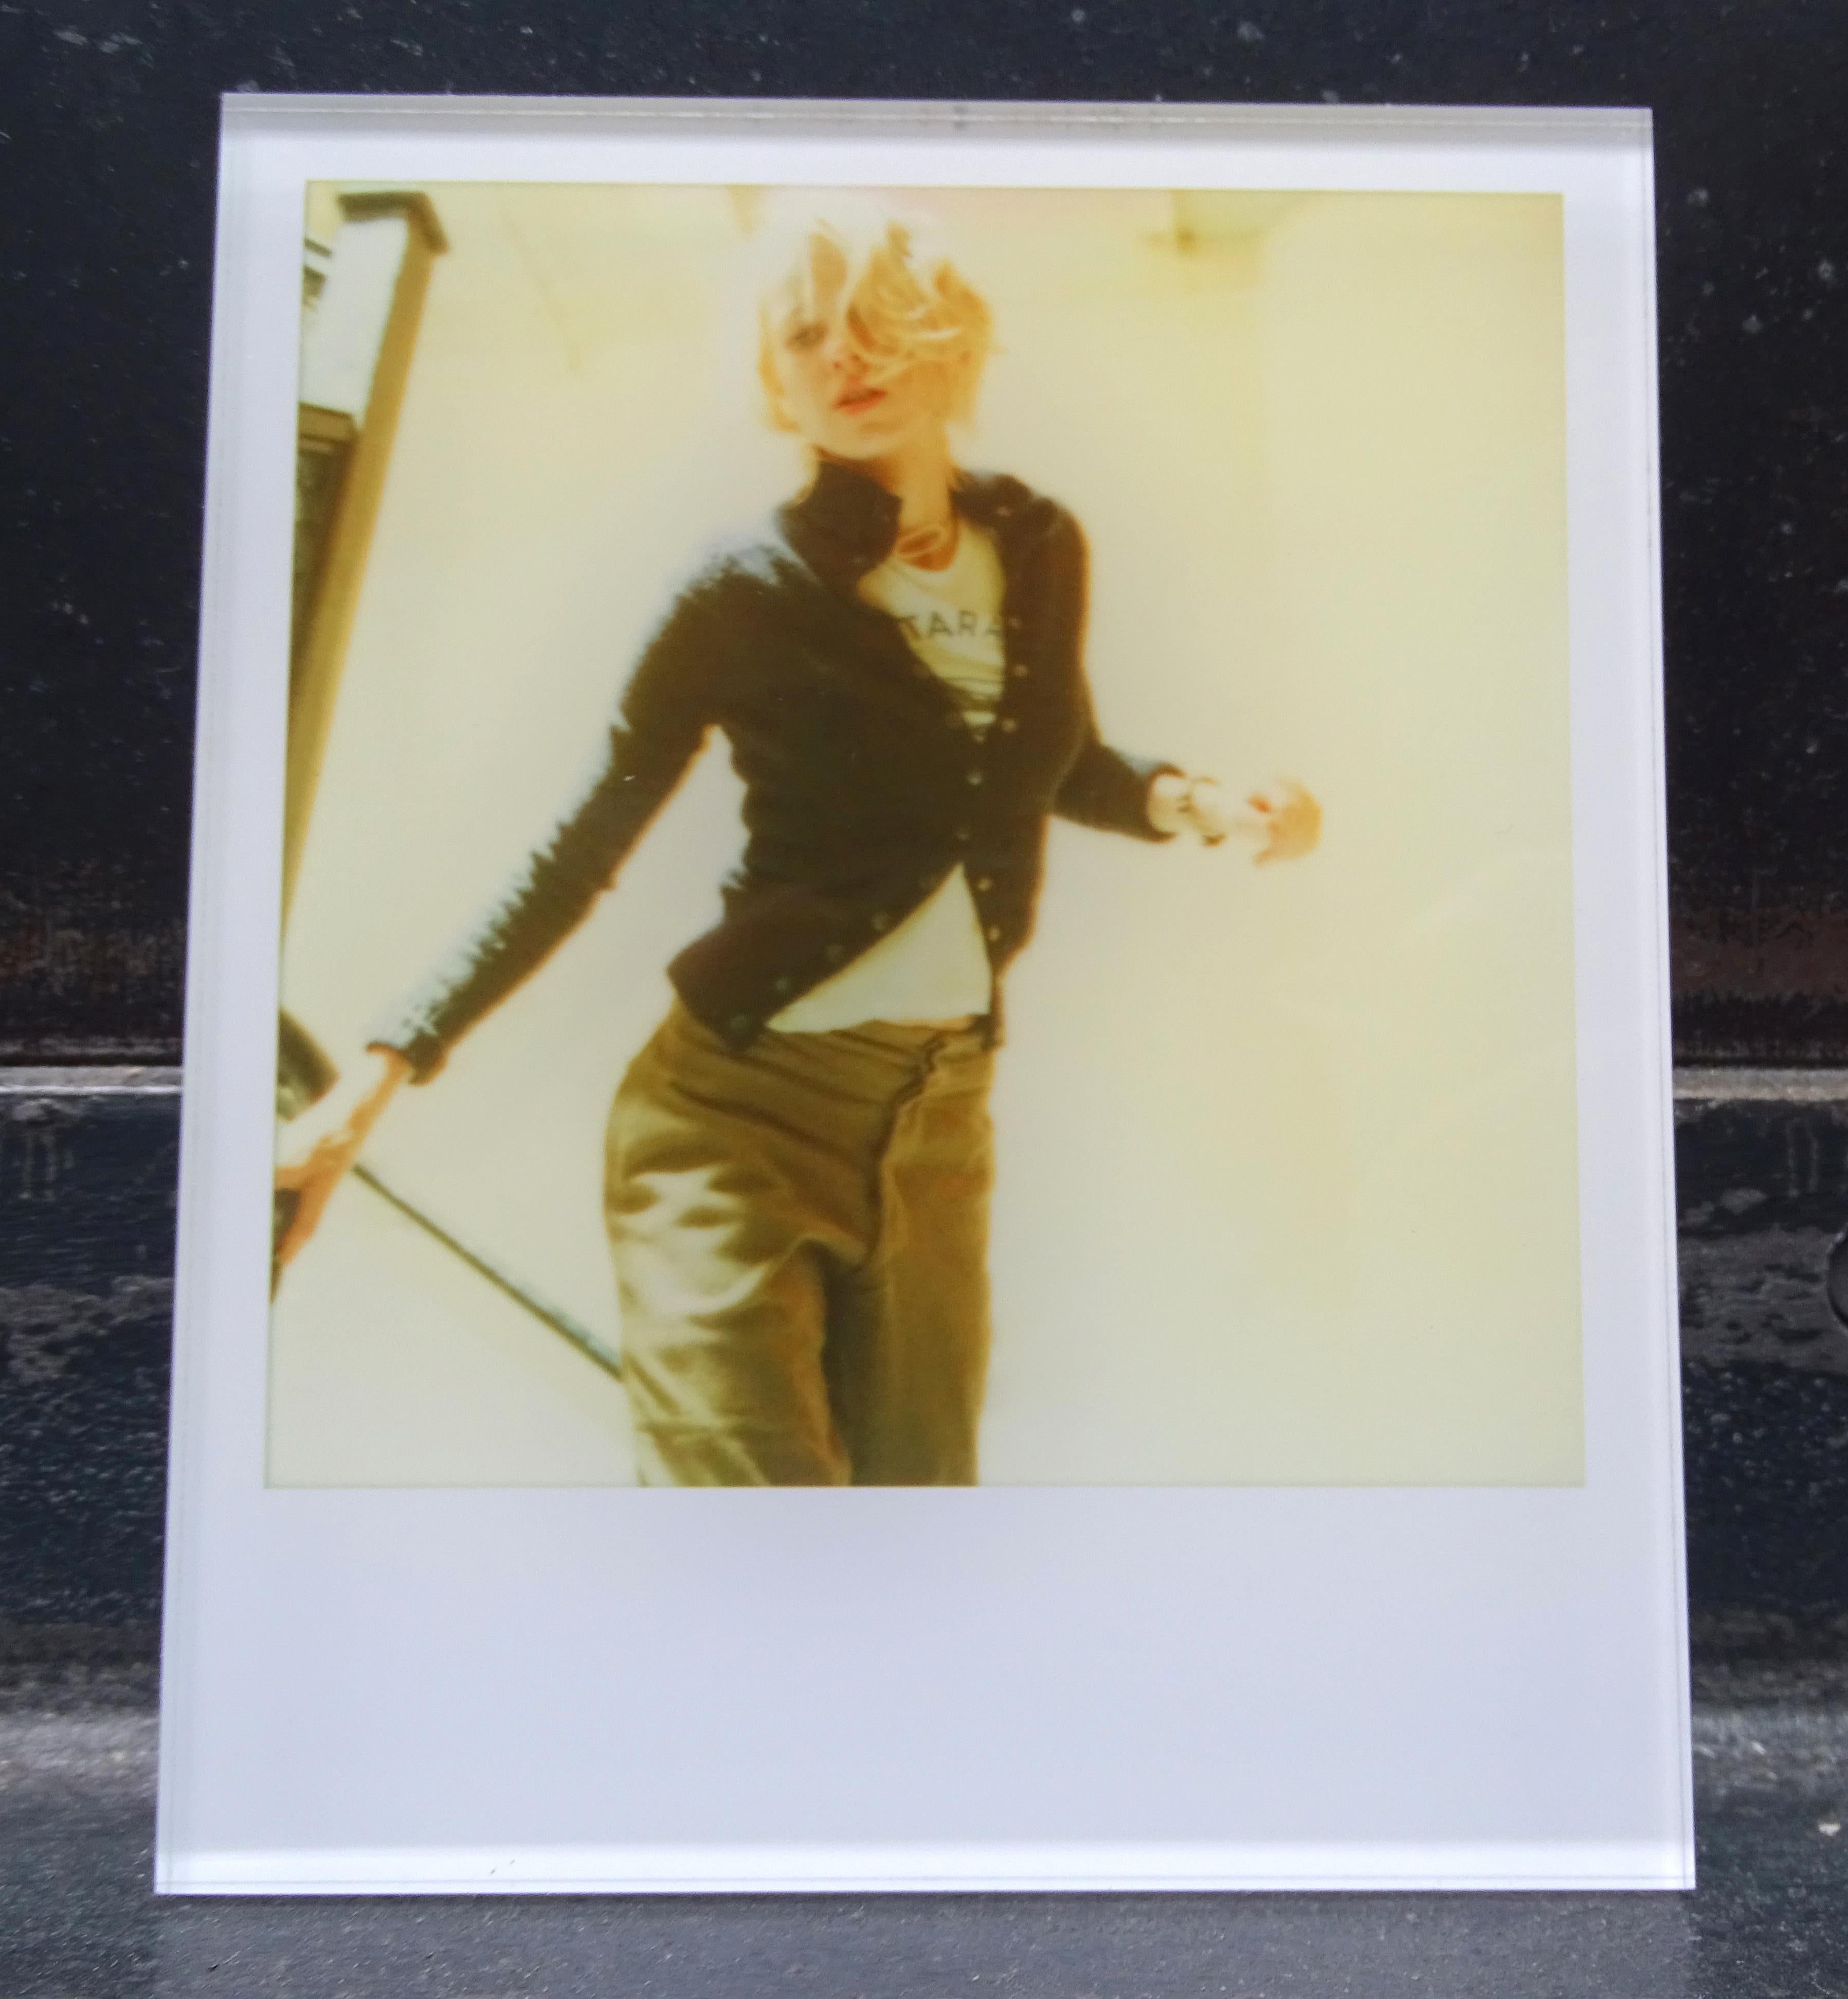 Stefanie Schneider's Minis
Lila running down the Stairs (Stay) - featuring Naomi Watts, 2006
signed and signature brand on verso
Lambda digital Color Photographs based on the Polaroid

from the movie 'Stay' by Marc Forster, featuring Ewan McGregor